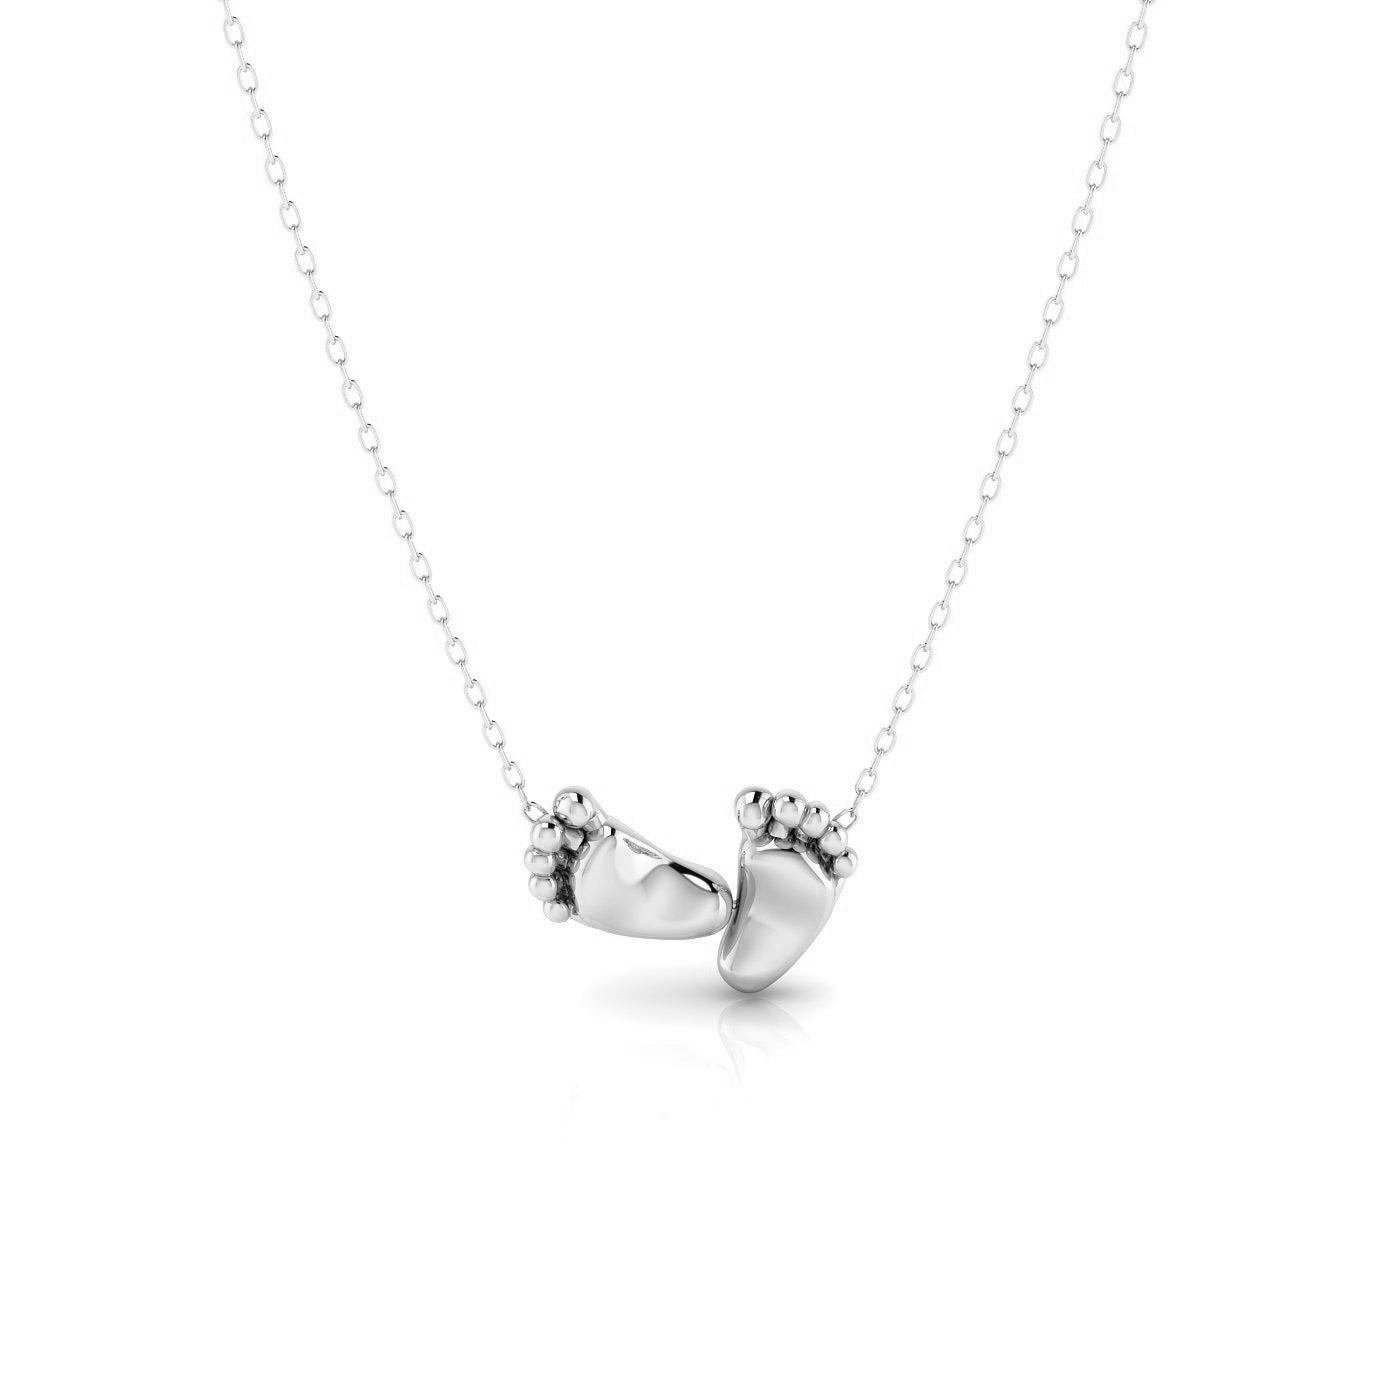 Pour La Vie - 18K White Gold Plated Silver Roof of Life Necklace